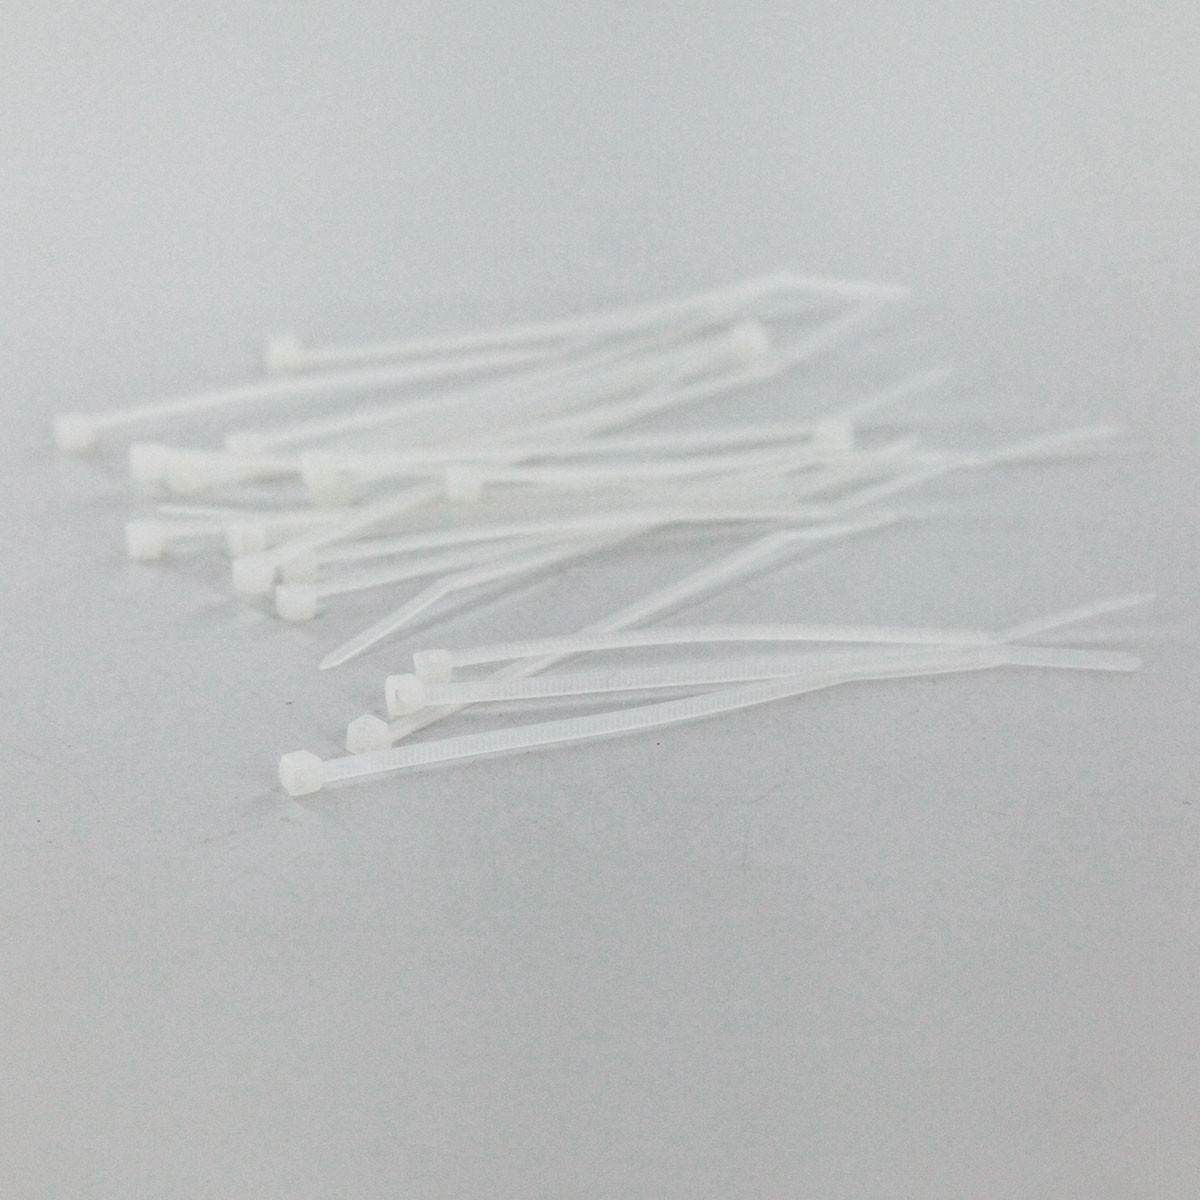 100mm x 2.5mm Cable Ties, 20pcs image 2